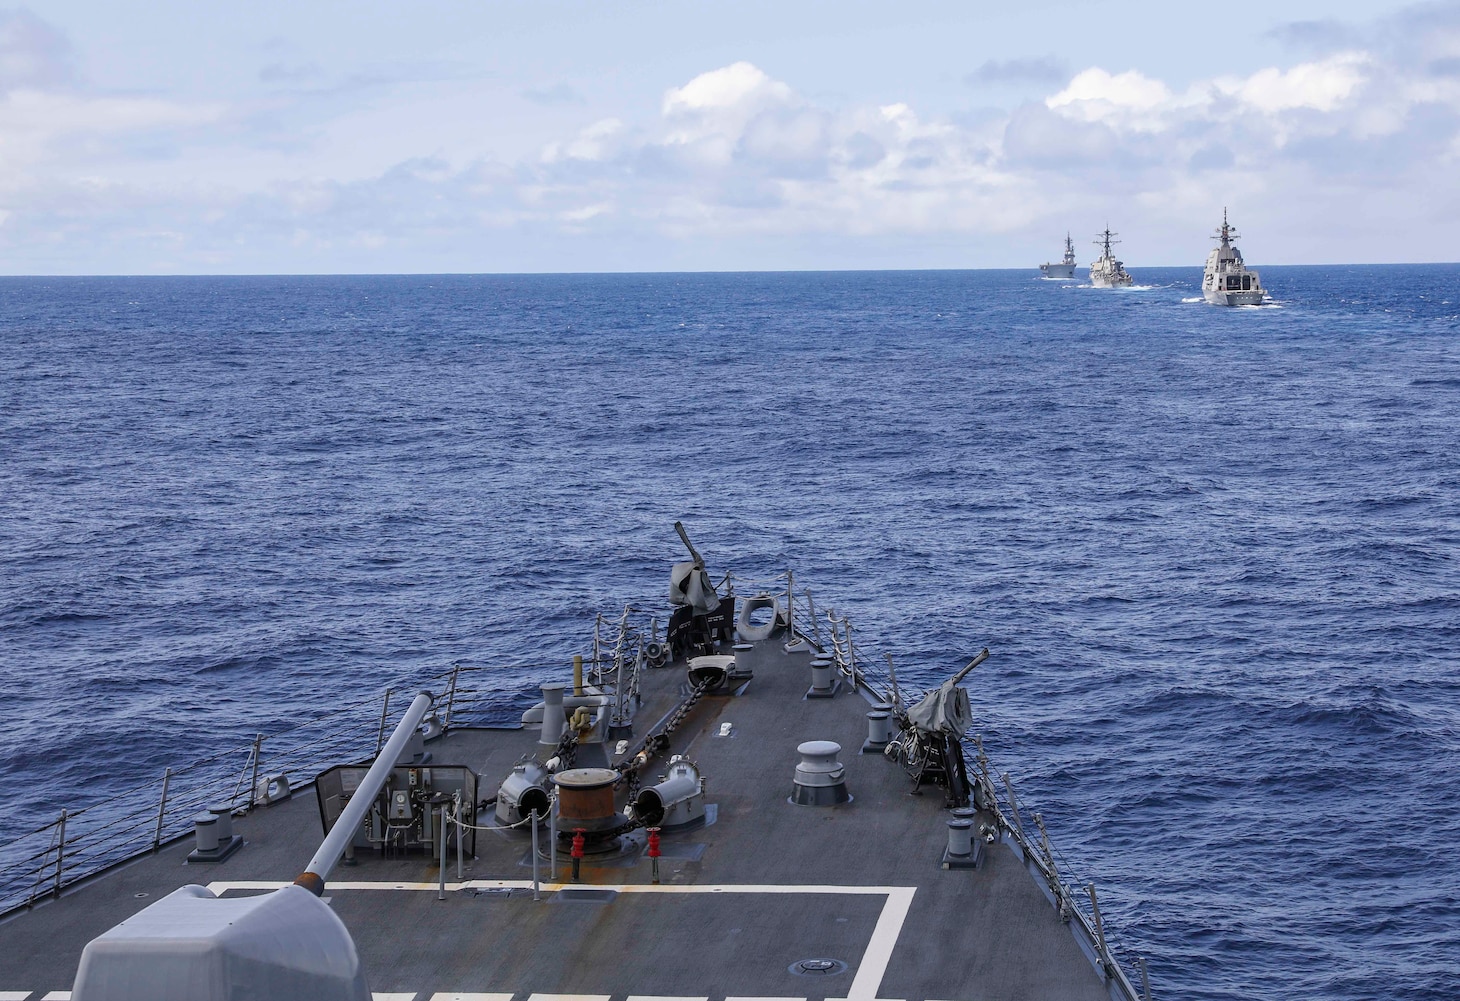 The Arleigh Burke-class guided-missile destroyers USS Benfold (DDG 65) and USS John S. McCain (DDG 56) sail in formation with the Japan Maritime Self-Defense Force guided-missile destroyer JS Shiranui (DDG 120) and helicopter destroyer JS Ise (DDH 182) during the annual U.S.-Japan Bilateral Advanced Warfighting Training Exercise.